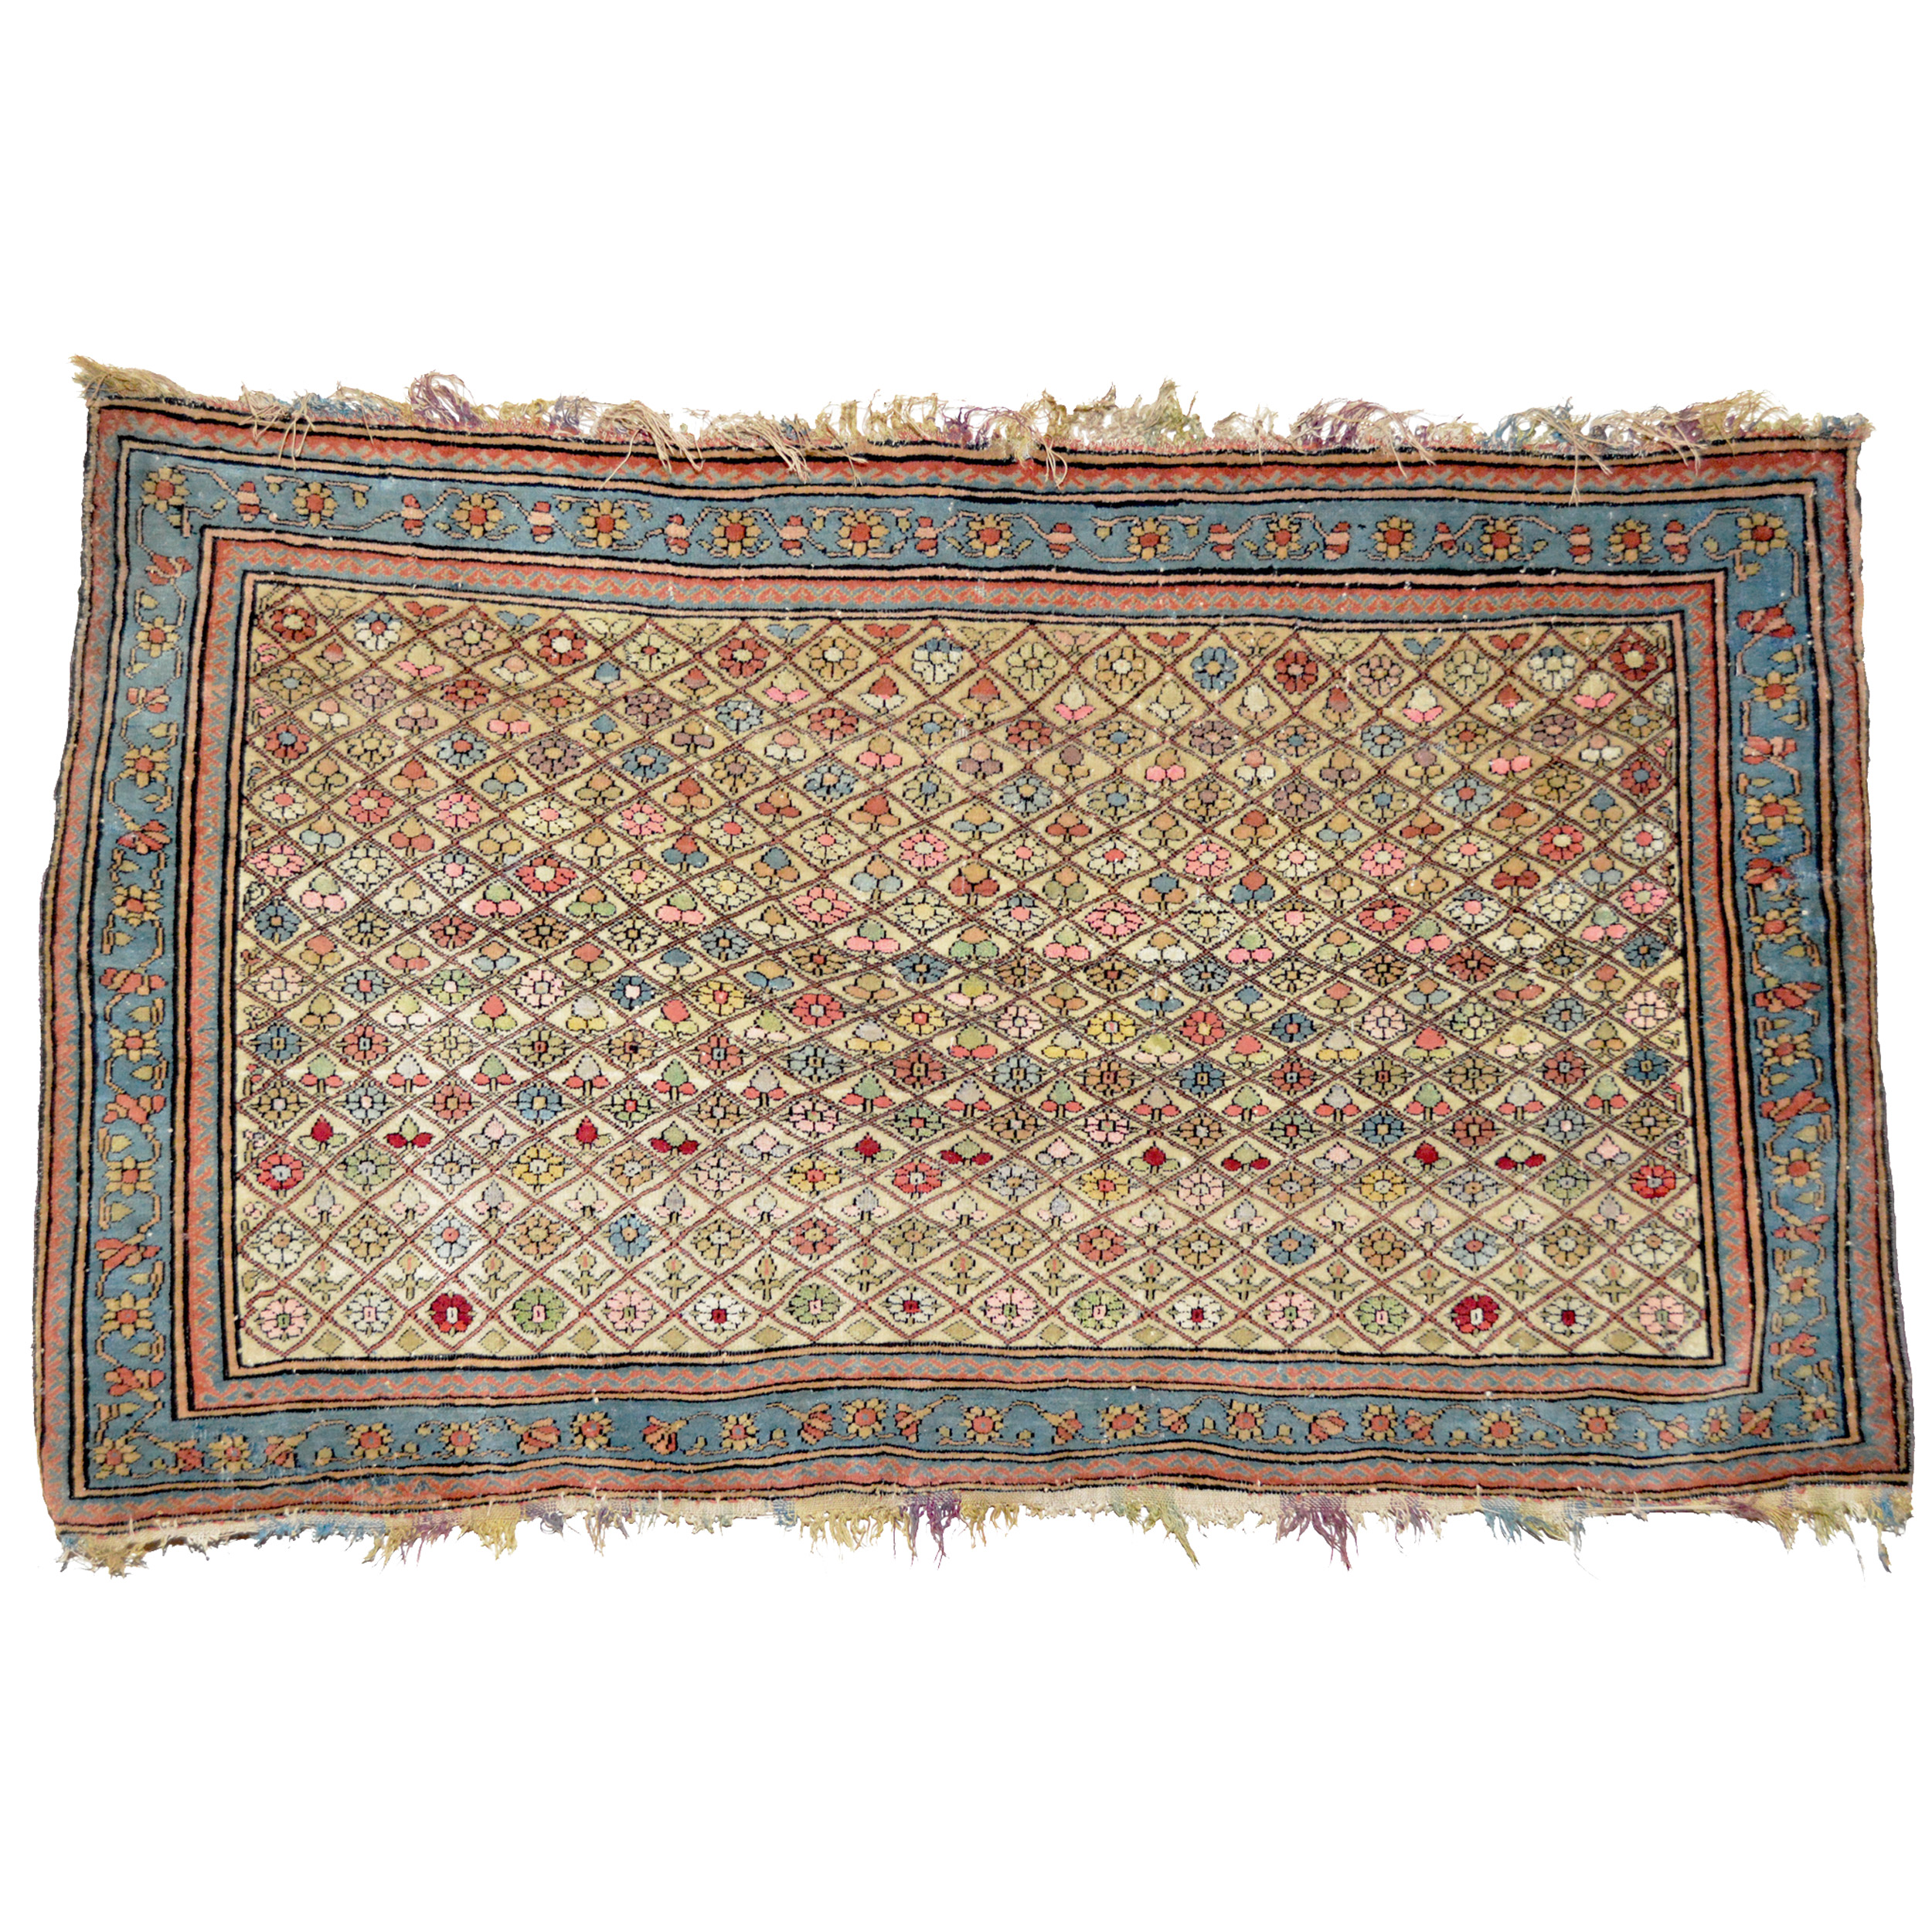 An antique Persian Mohtasham Kashan 'mat" or "poshti" (a small rug approximately 2 feet by 3 feet in size) with a lattice and flower design on an ivory field framed by a mid blue borer, circa 1885. Douglas tock Gallery specializes in antique ohtasham Kashan rugs and room size carpets.